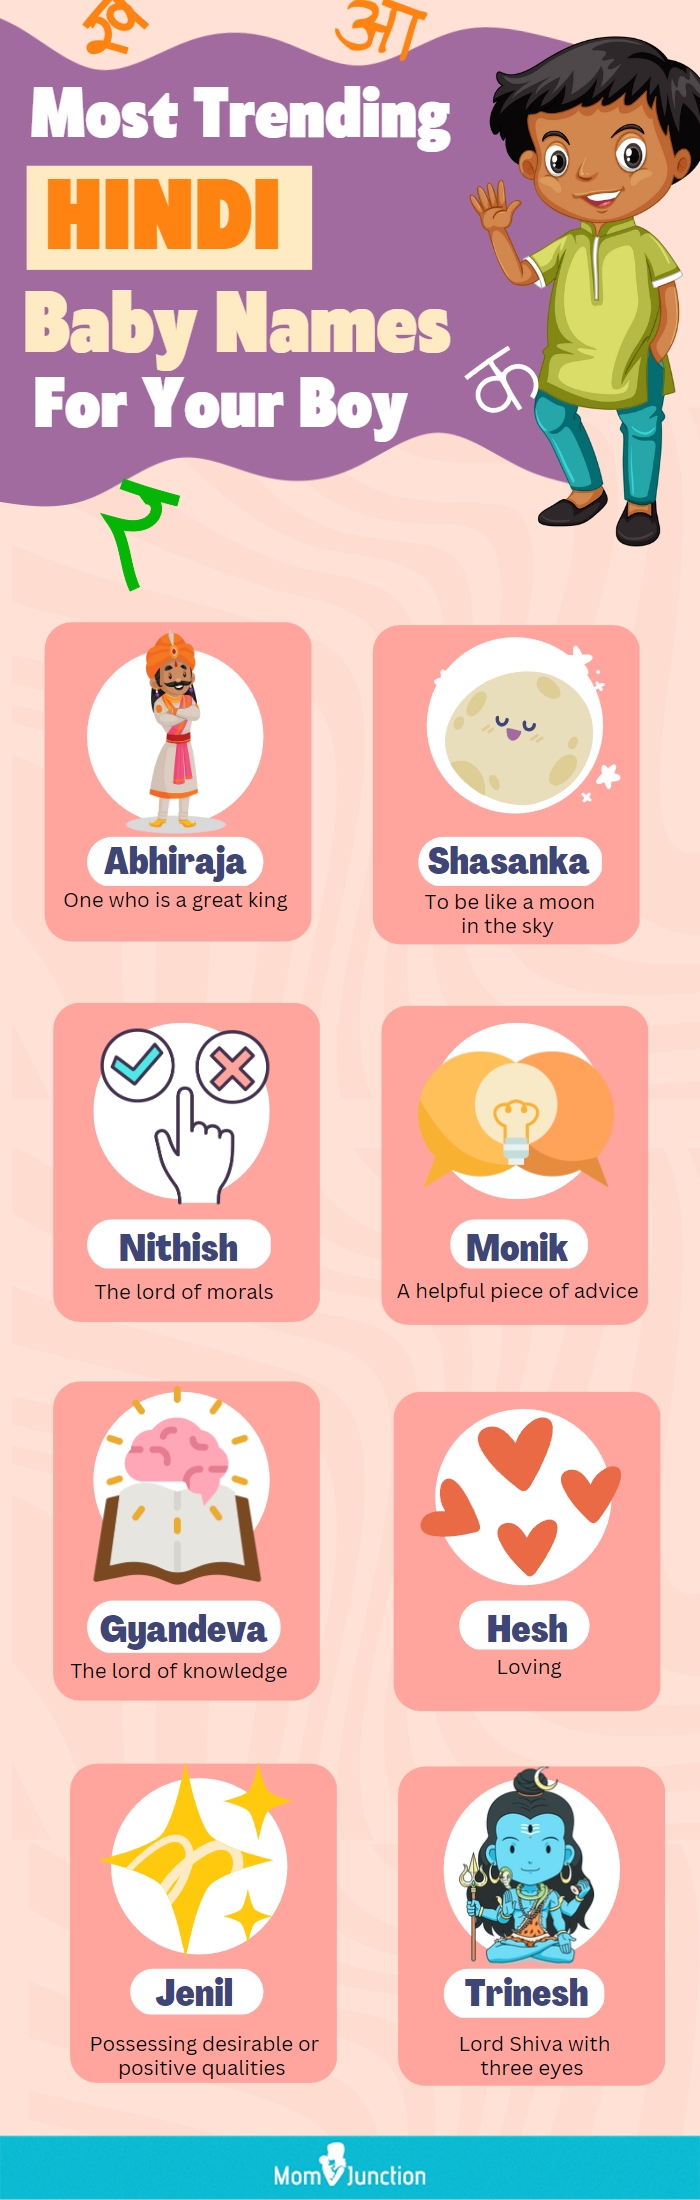 most trending hindi baby names your boy (infographic)